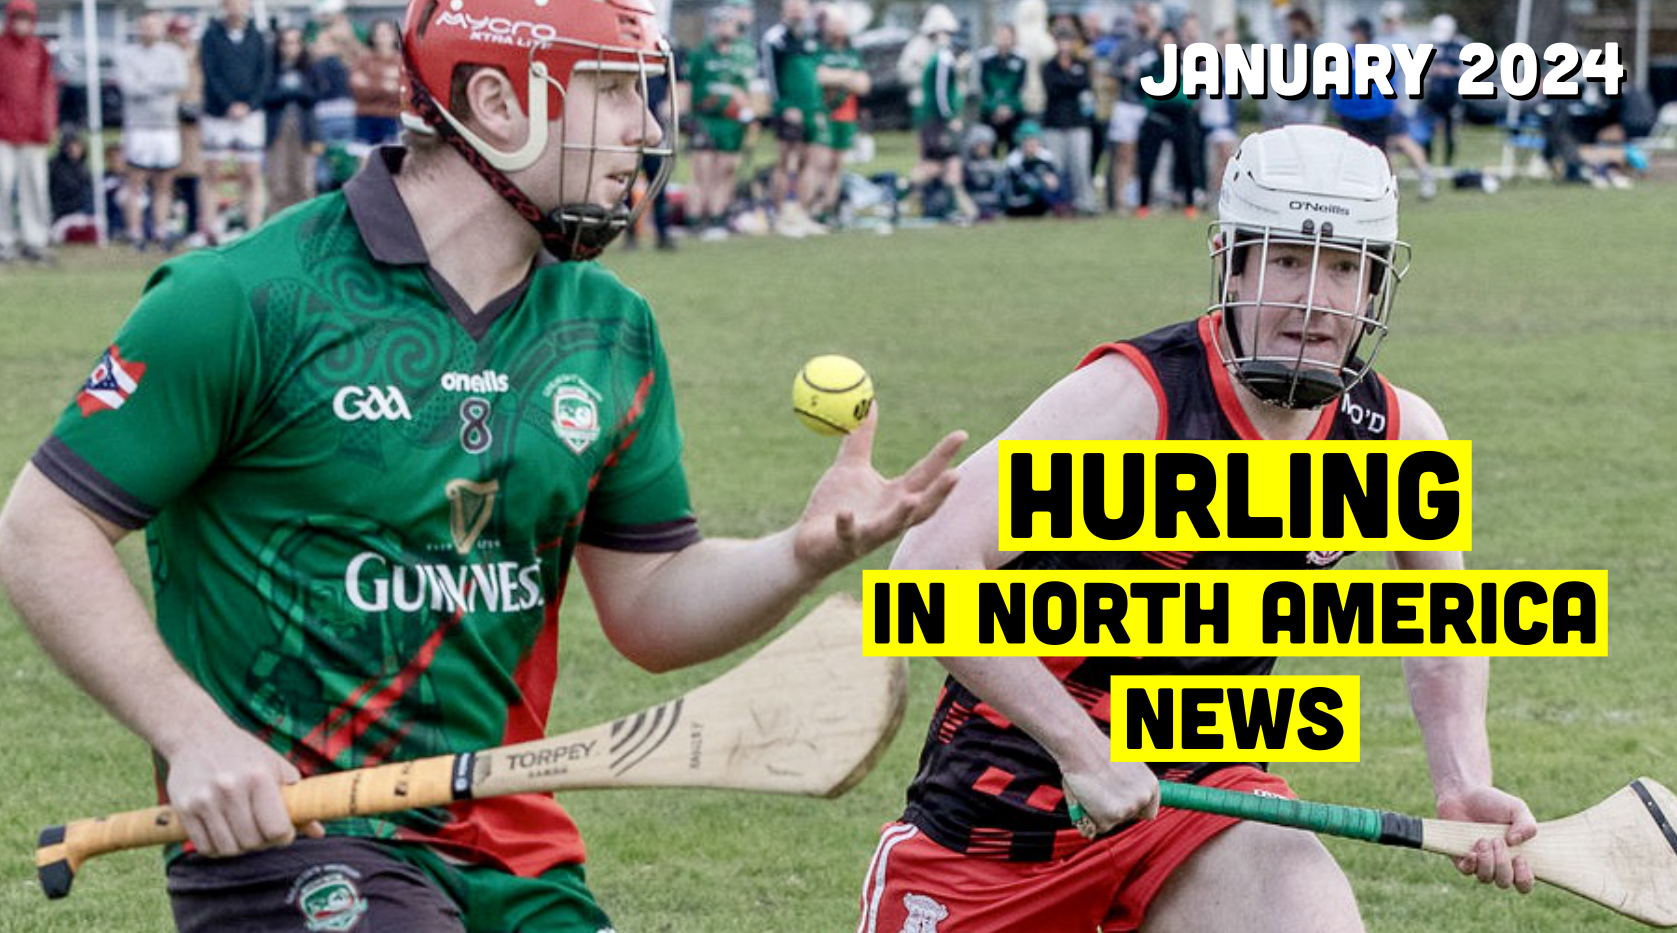 Keep up with the expanding North American Hurling community as we take a look back at January 2024. Highlights include: New York’s historic win at the Connacht League Finals, the first hurling tournament of 2024 in Florida, and Jason Kelce trying hurling in Philadelphia.